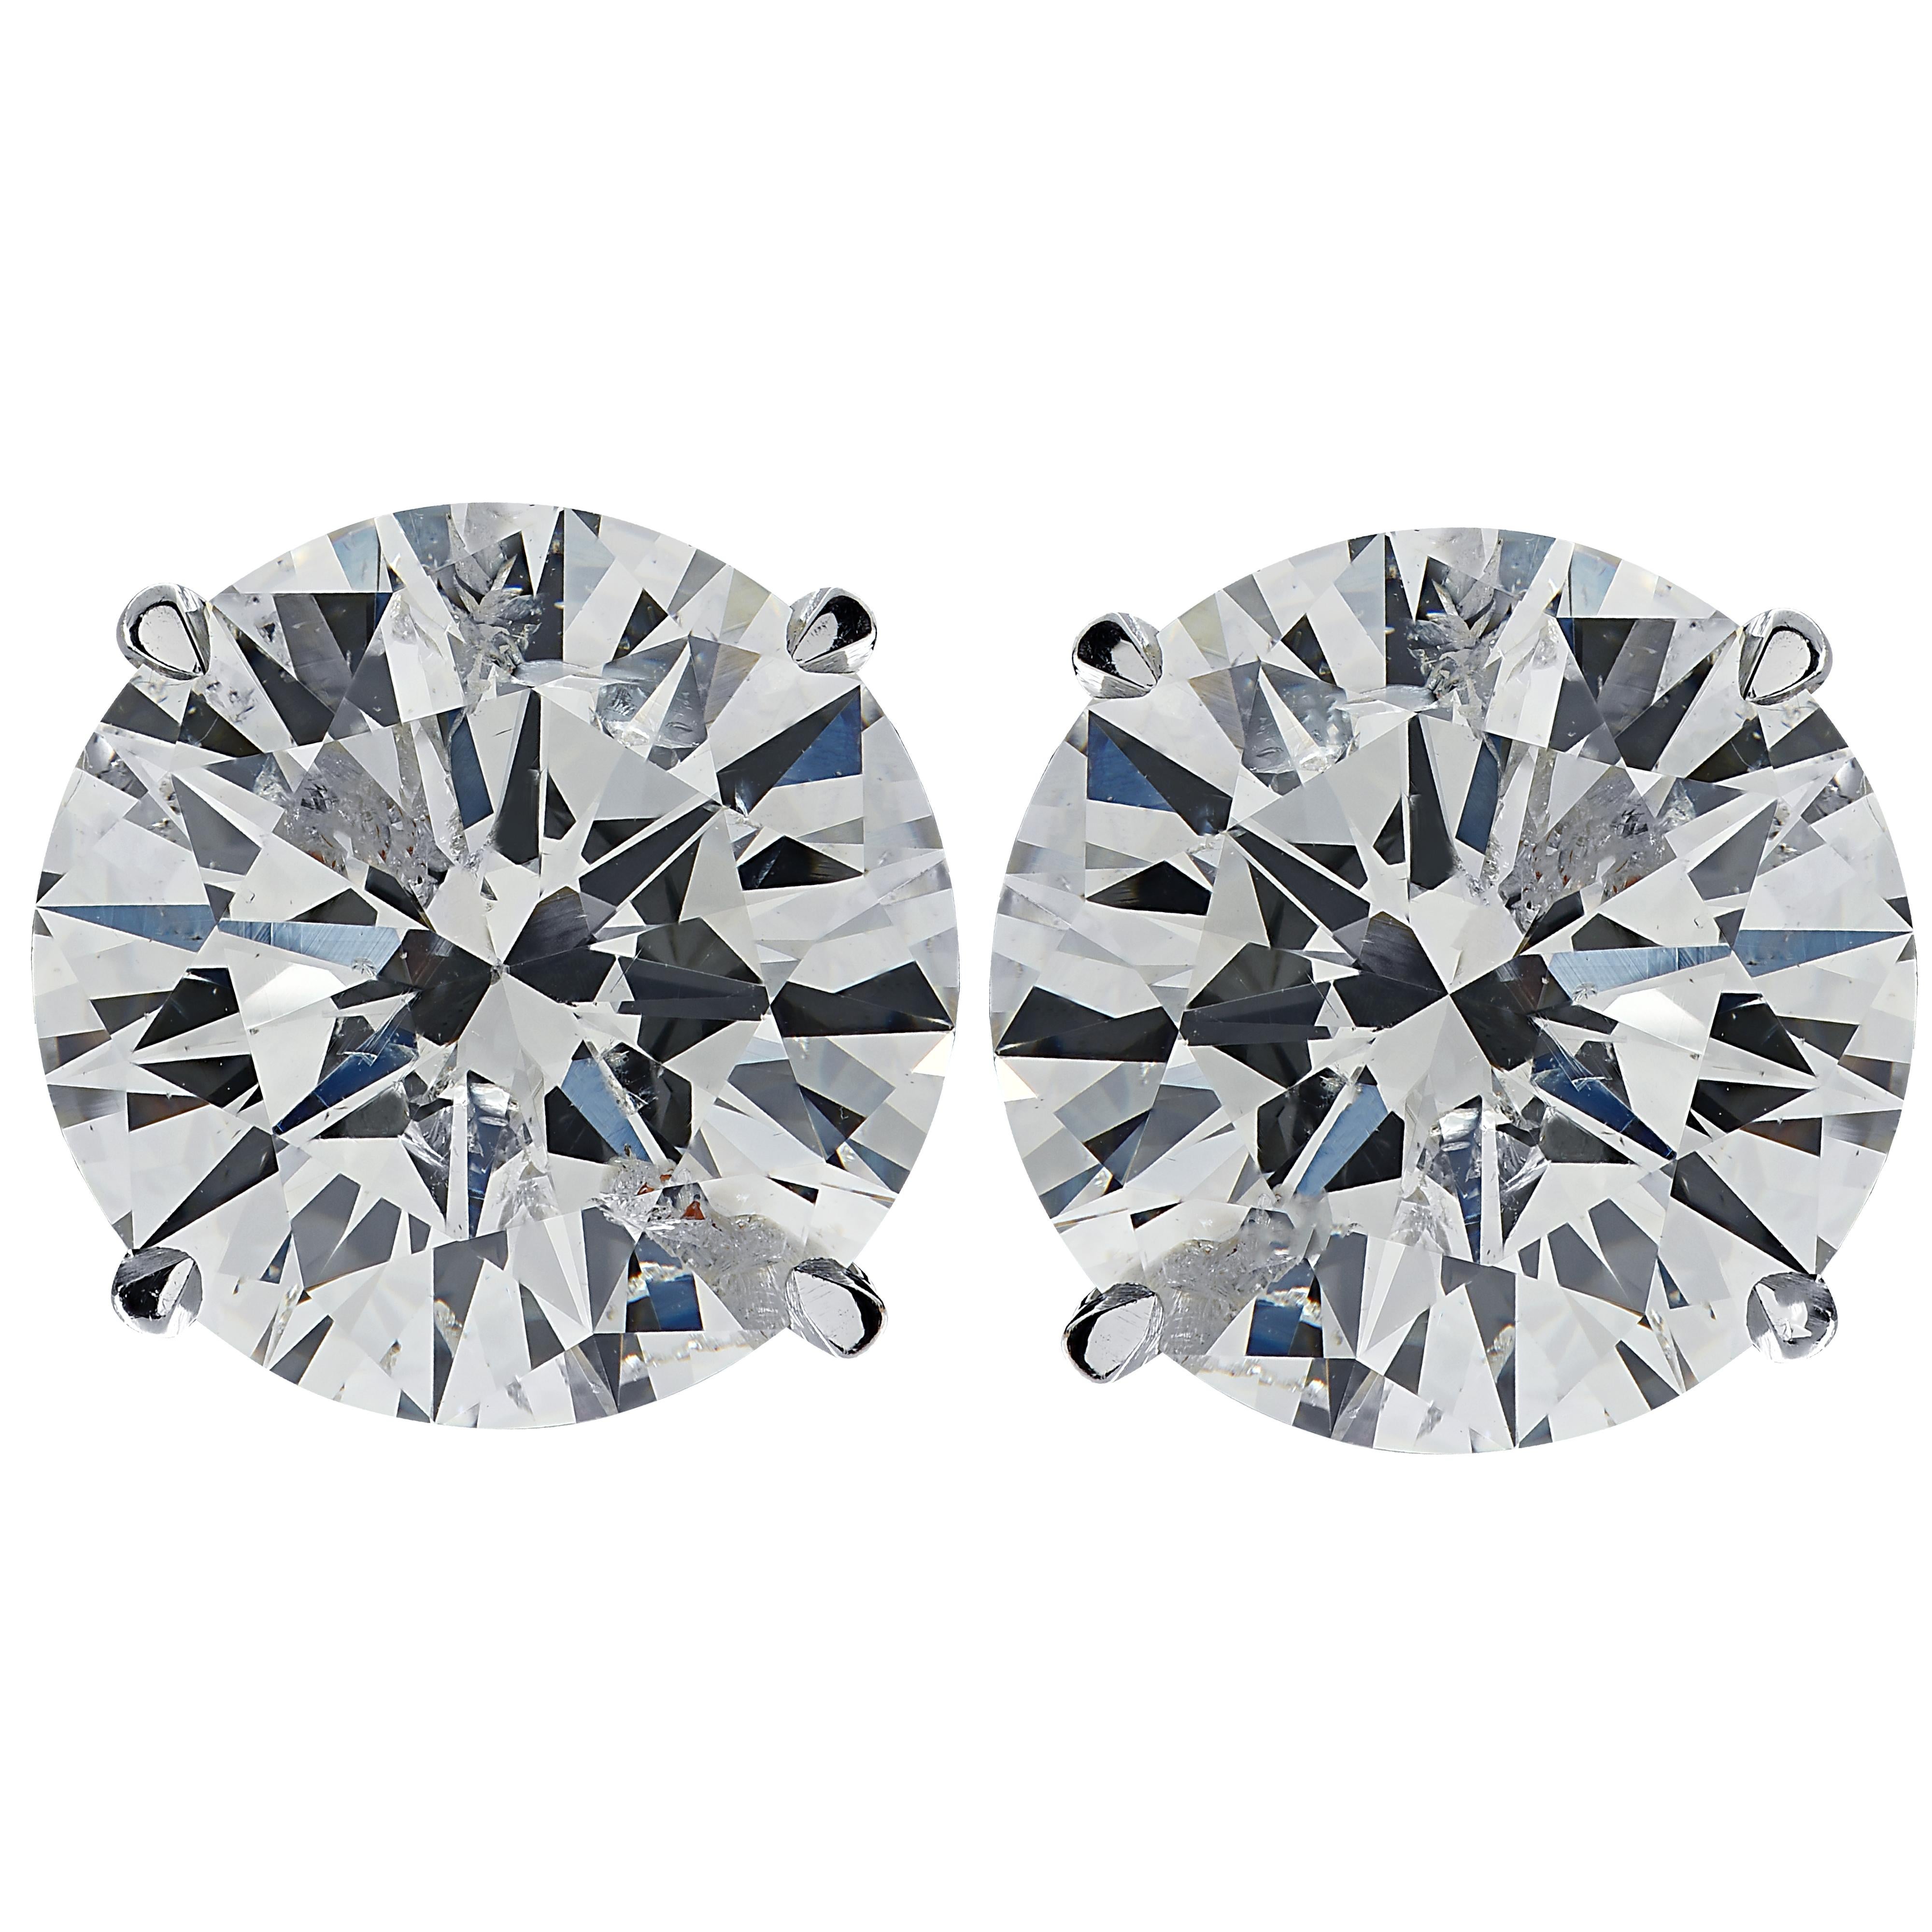 Stunning Vivid Diamonds solitaire stud earrings crafted in 18 karat white gold, showcasing 2 spectacular round brilliant cut diamonds weighing 3.00 carats total, L color and VS-SI clarity. These diamonds were carefully selected and perfectly matched